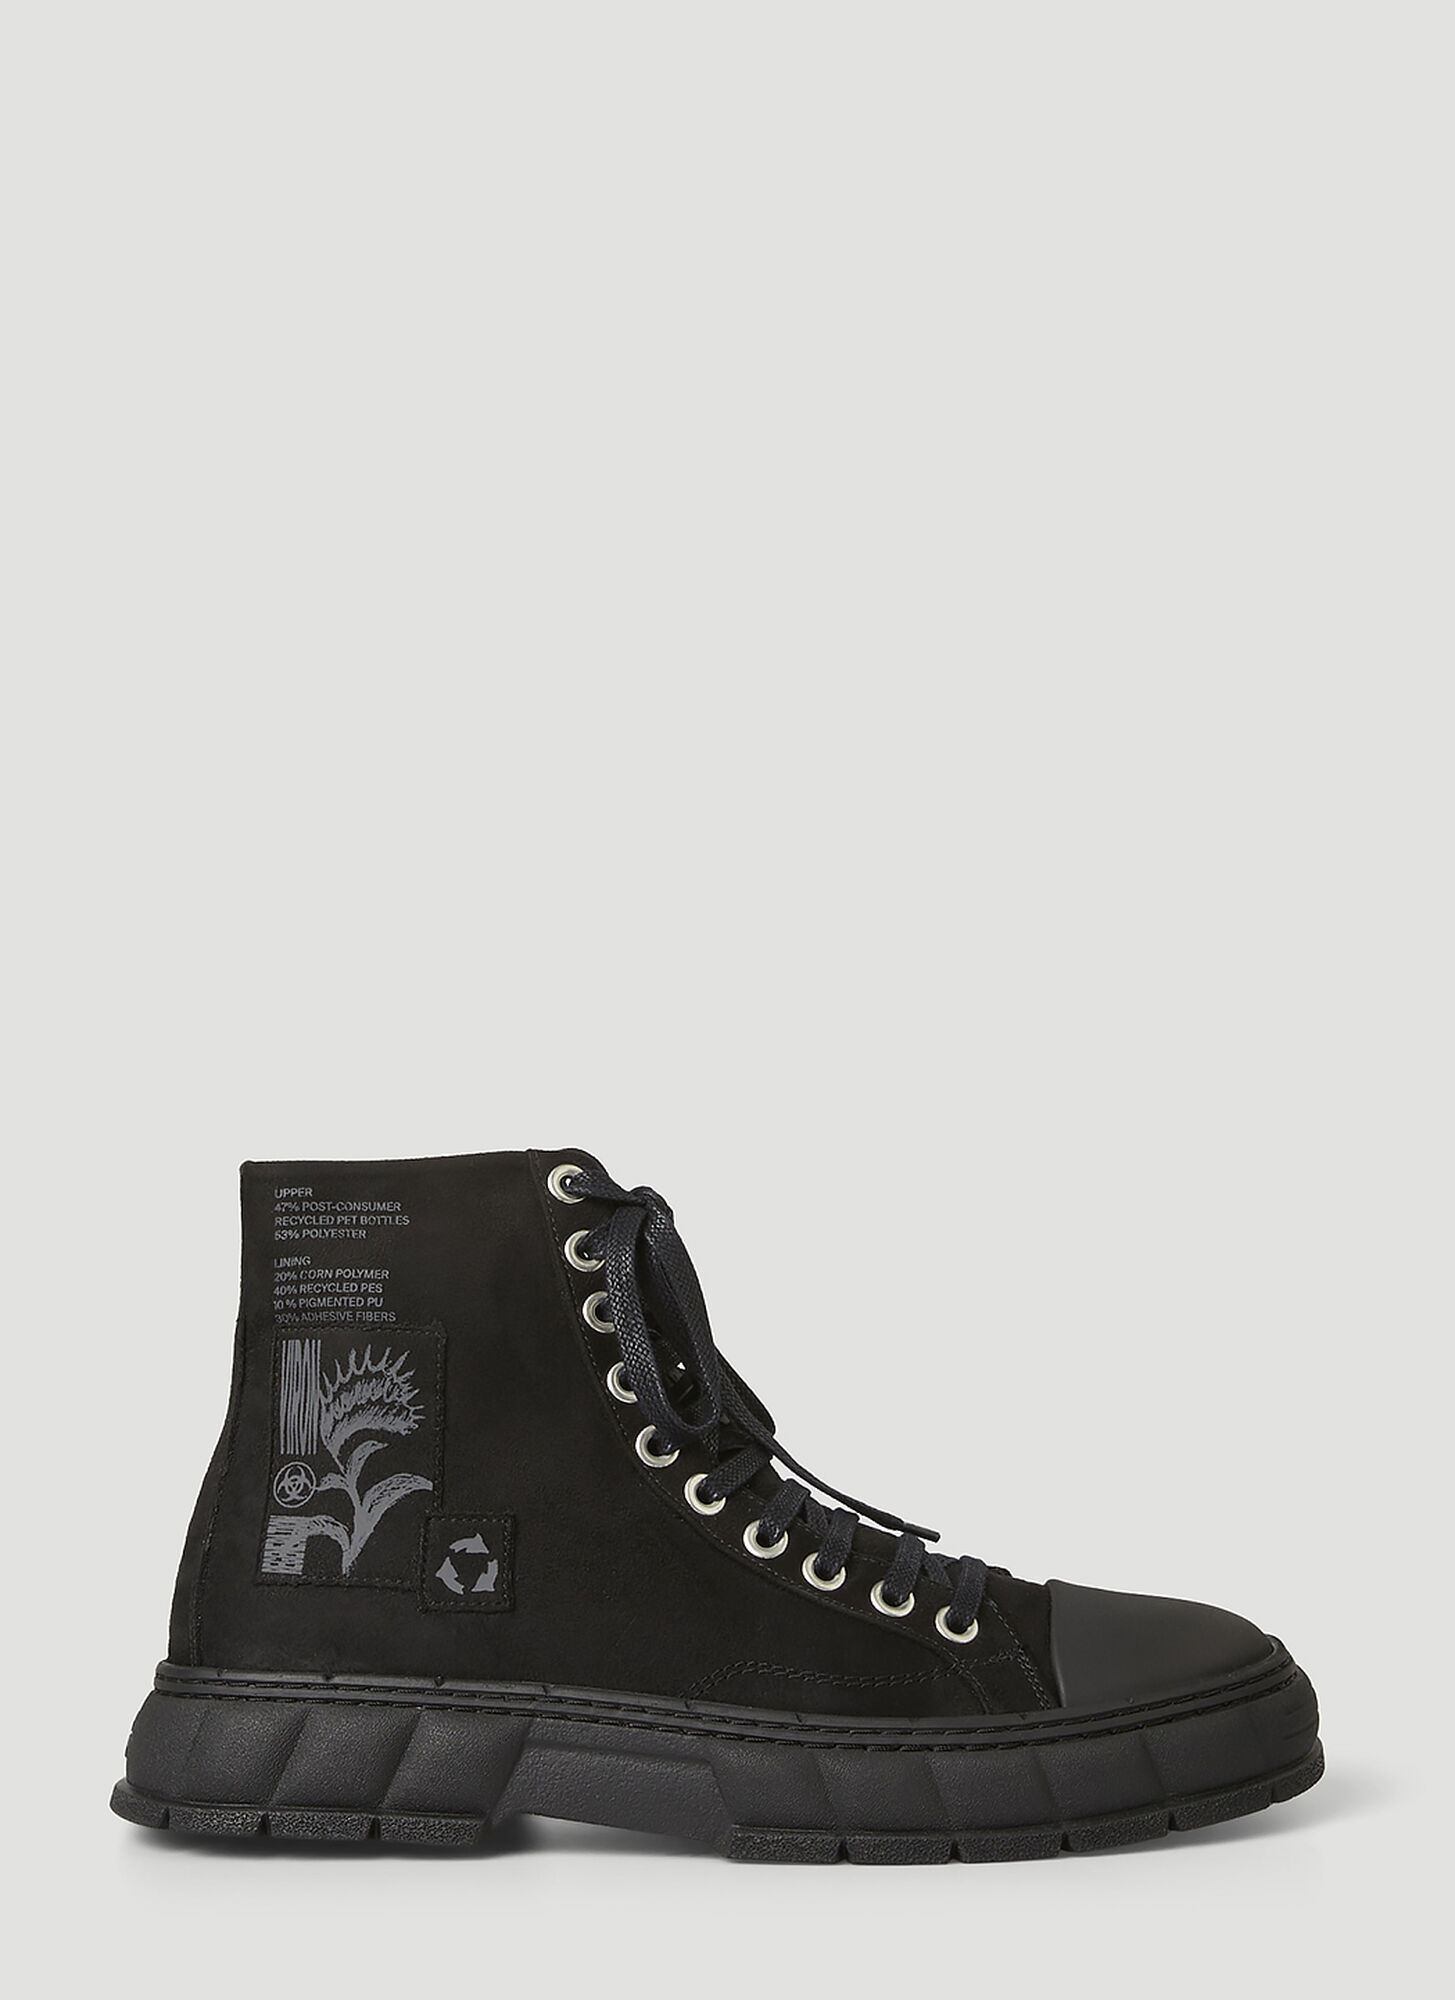 Viron 1982 Waxed Canvas High-top Sneakers In Black